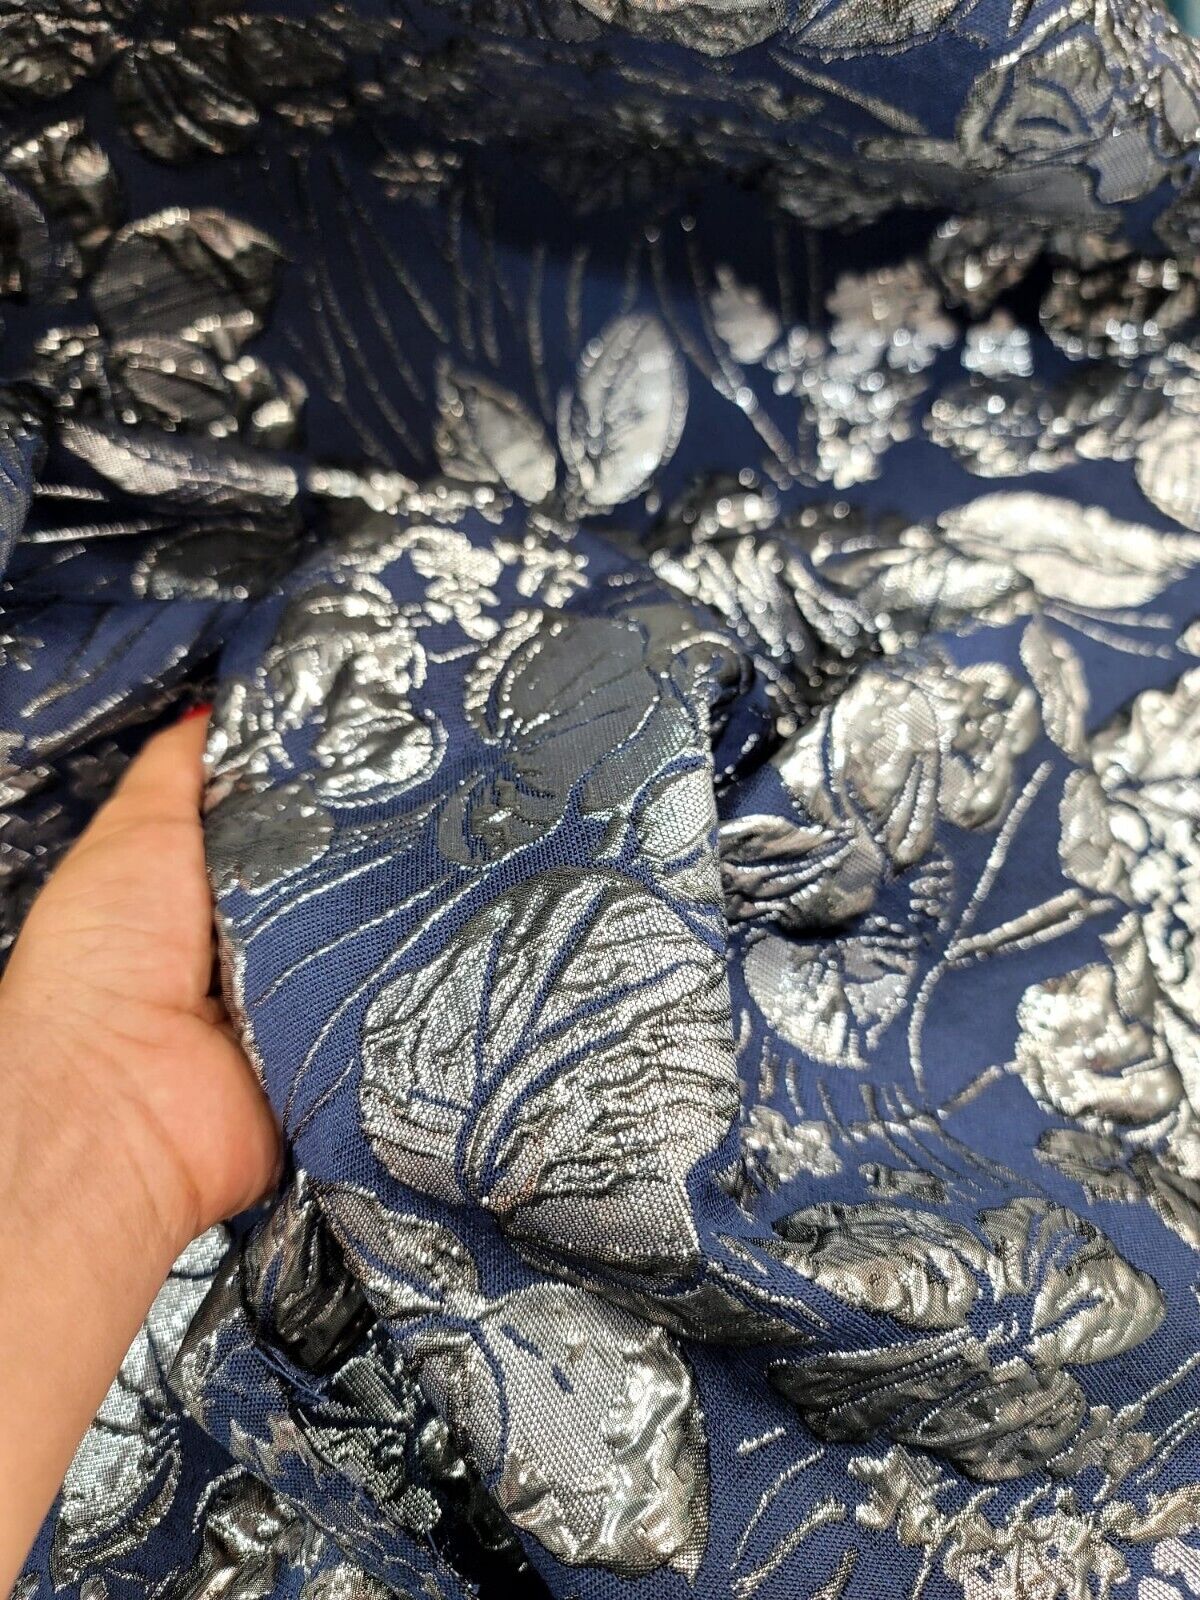 Navy Blue Brocade Silver Floral Prom Fabric - Sold By The Yard - Gown Quinceañera (60” Width)